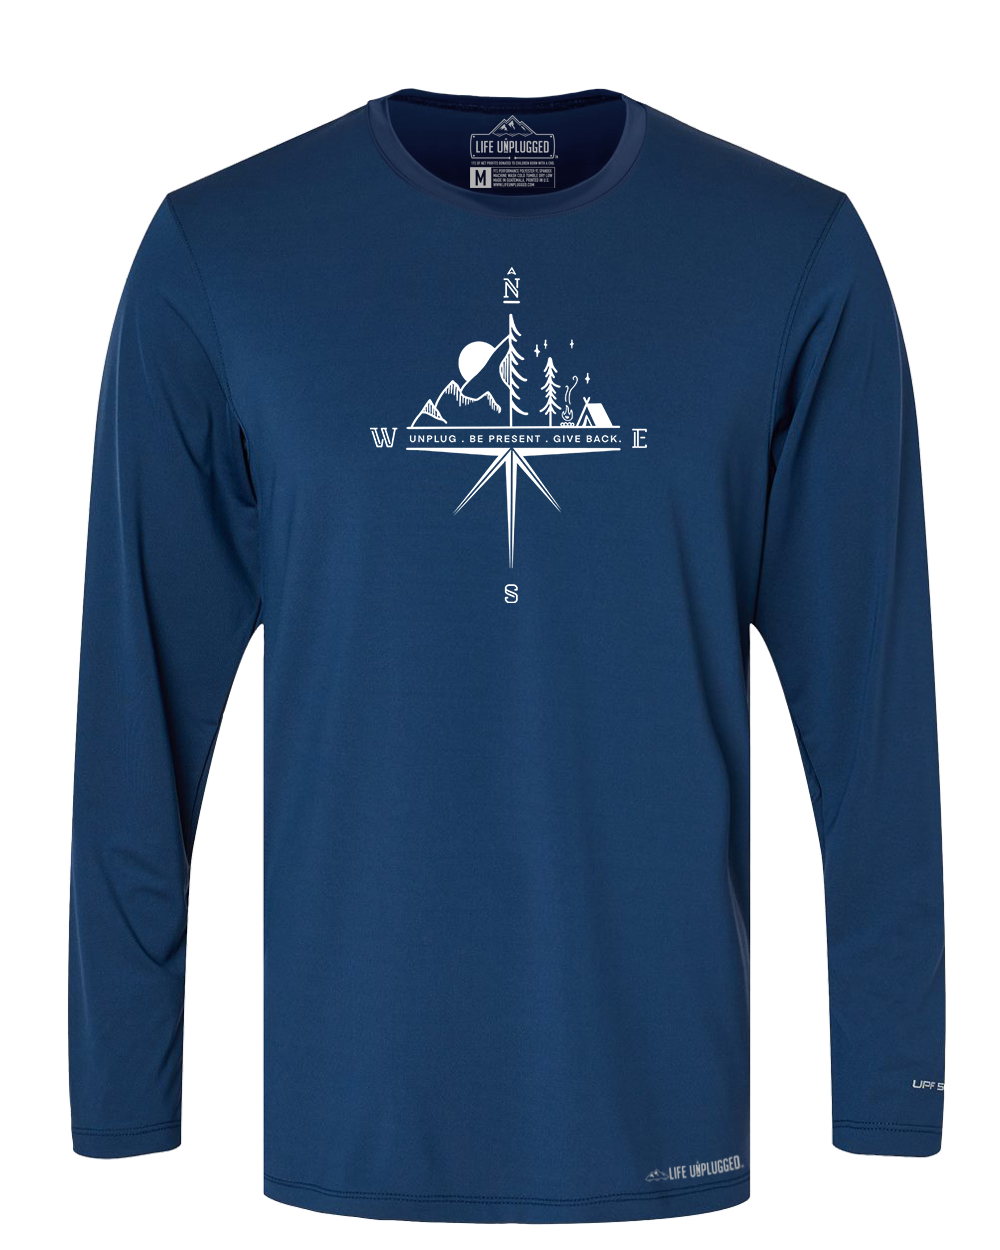 Compass Mountain Scene Poly/Spandex High Performance Long Sleeve with UPF 50+ - Life Unplugged